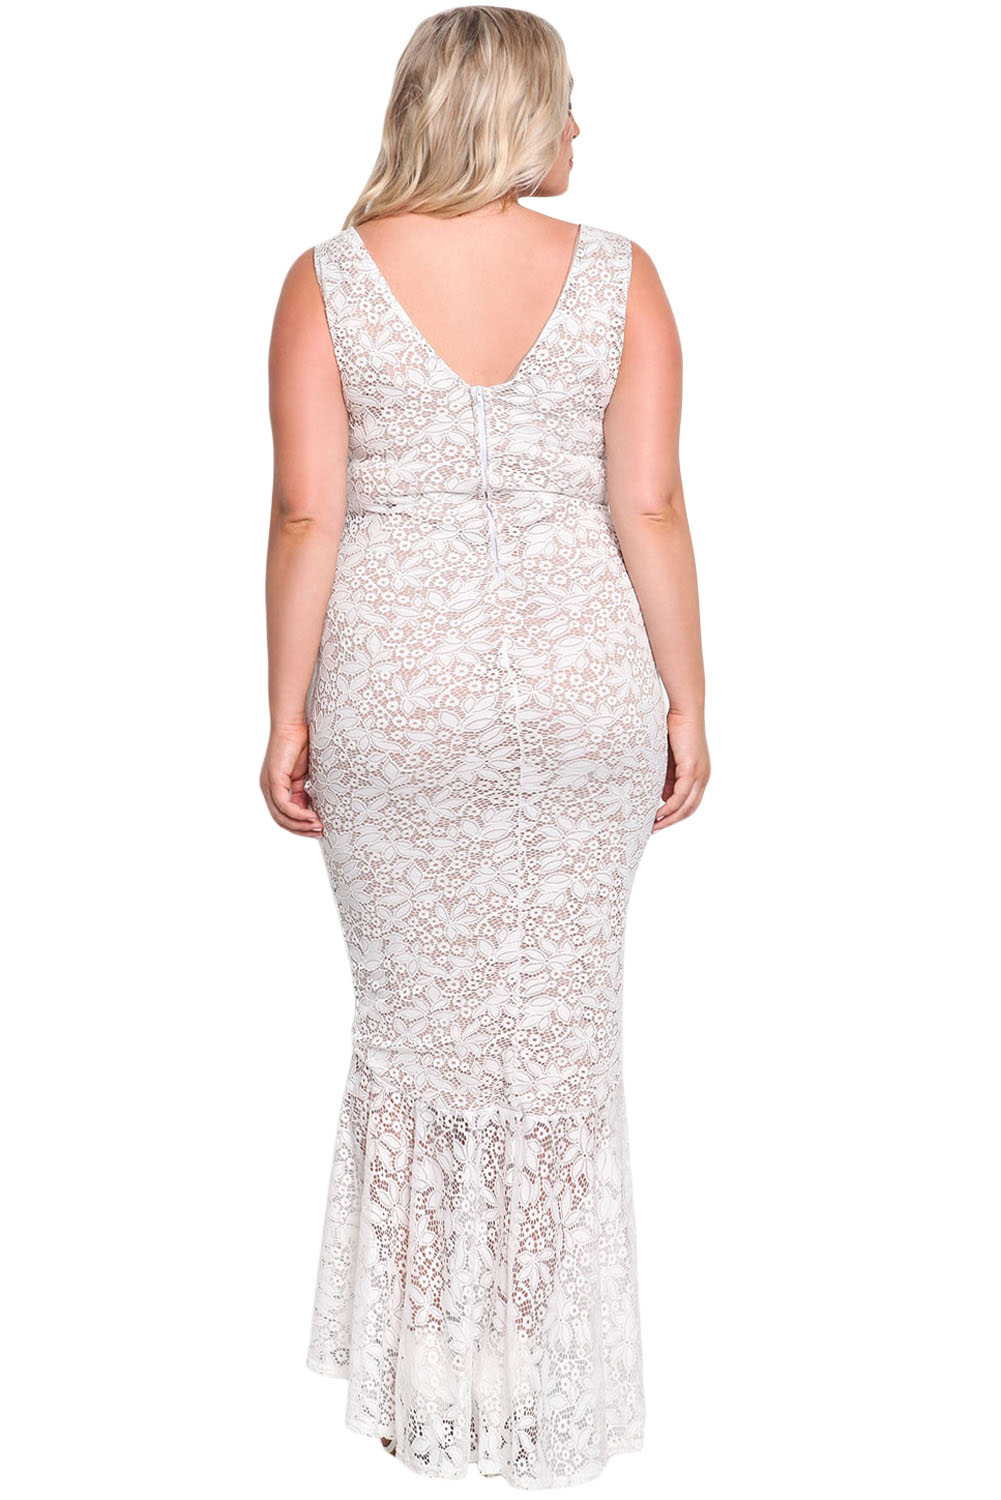 BY61689-1 White Plus Size Floral Lace Ruffle Mermaid Maxi Gown